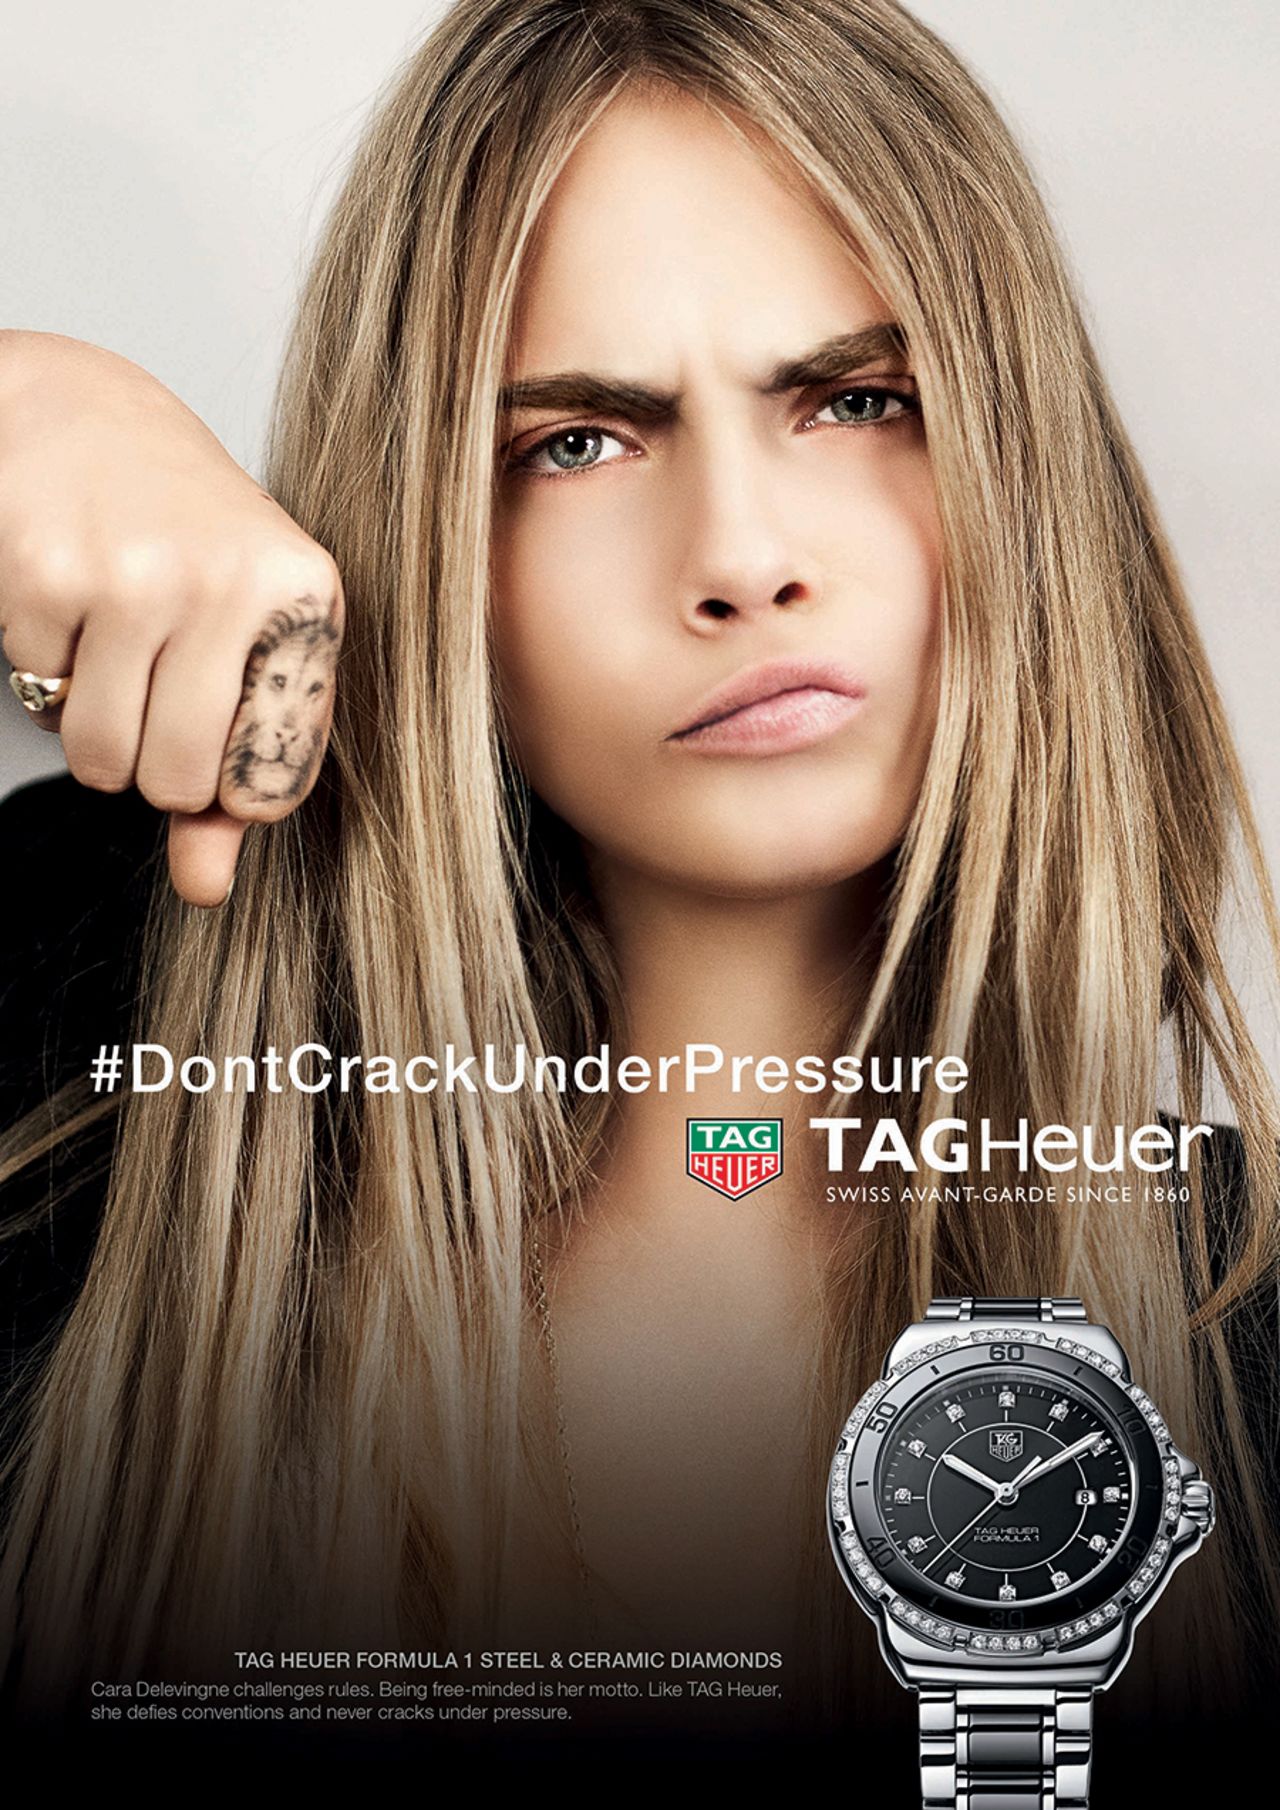 British model Cara Delevingne in a current advert for Tag Heuer -- the slogan was penned in 1990 by rugby-player-turned-ad-man Brett Gosper.